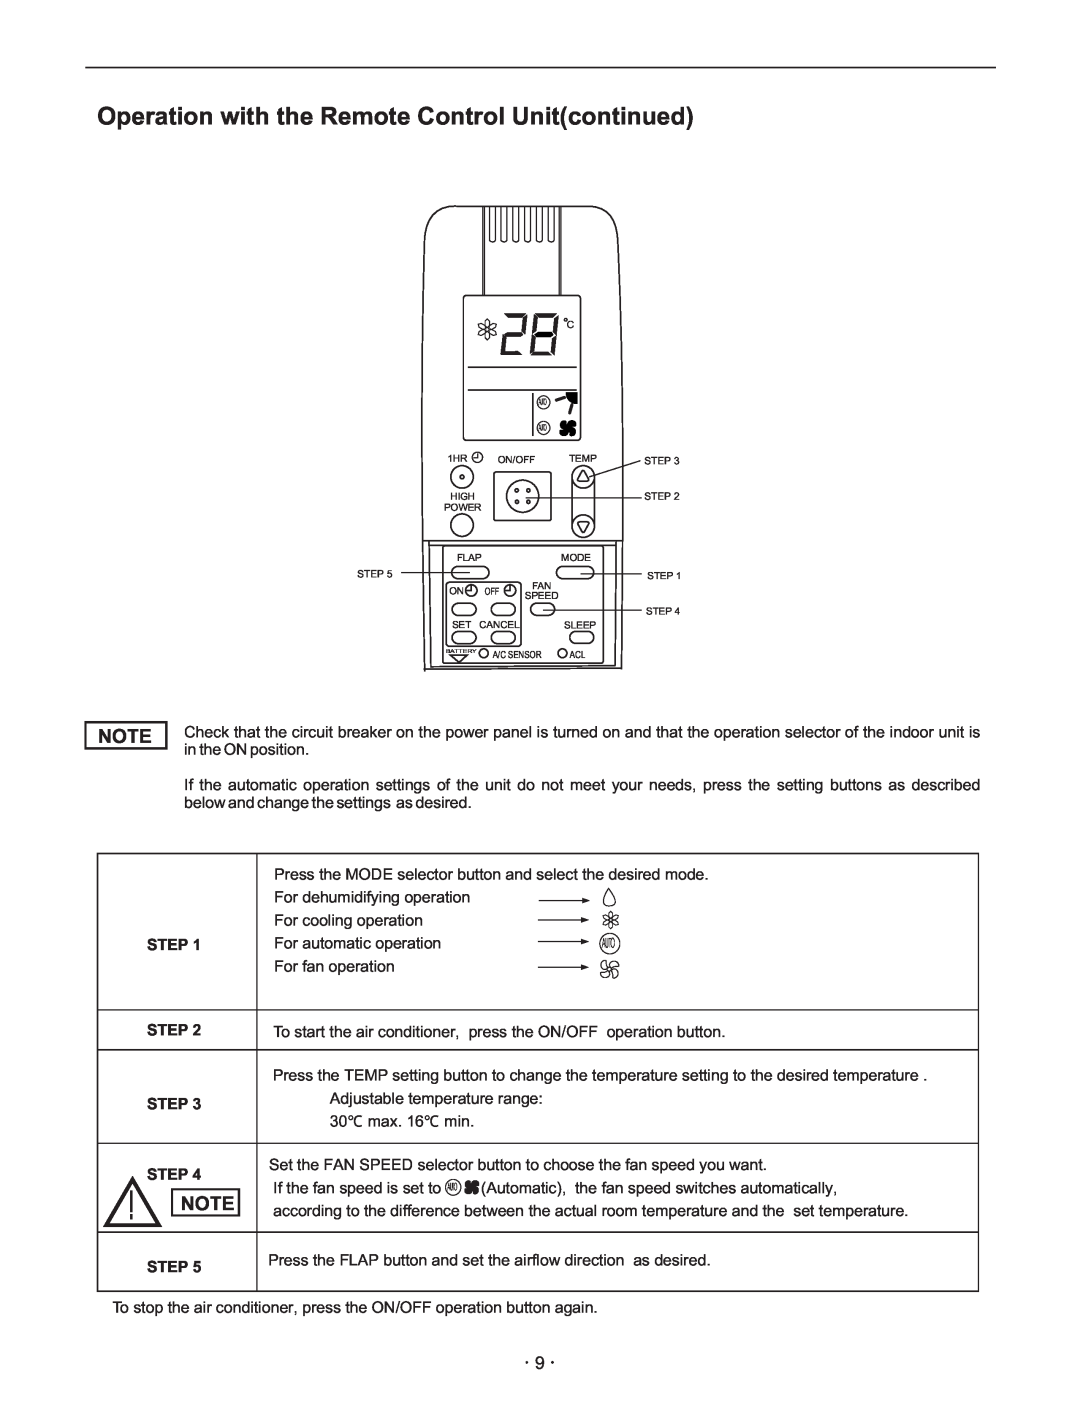 Hisense Group KF 346GWE instruction manual Operation with the Remote Control Unitcontinued, Step 